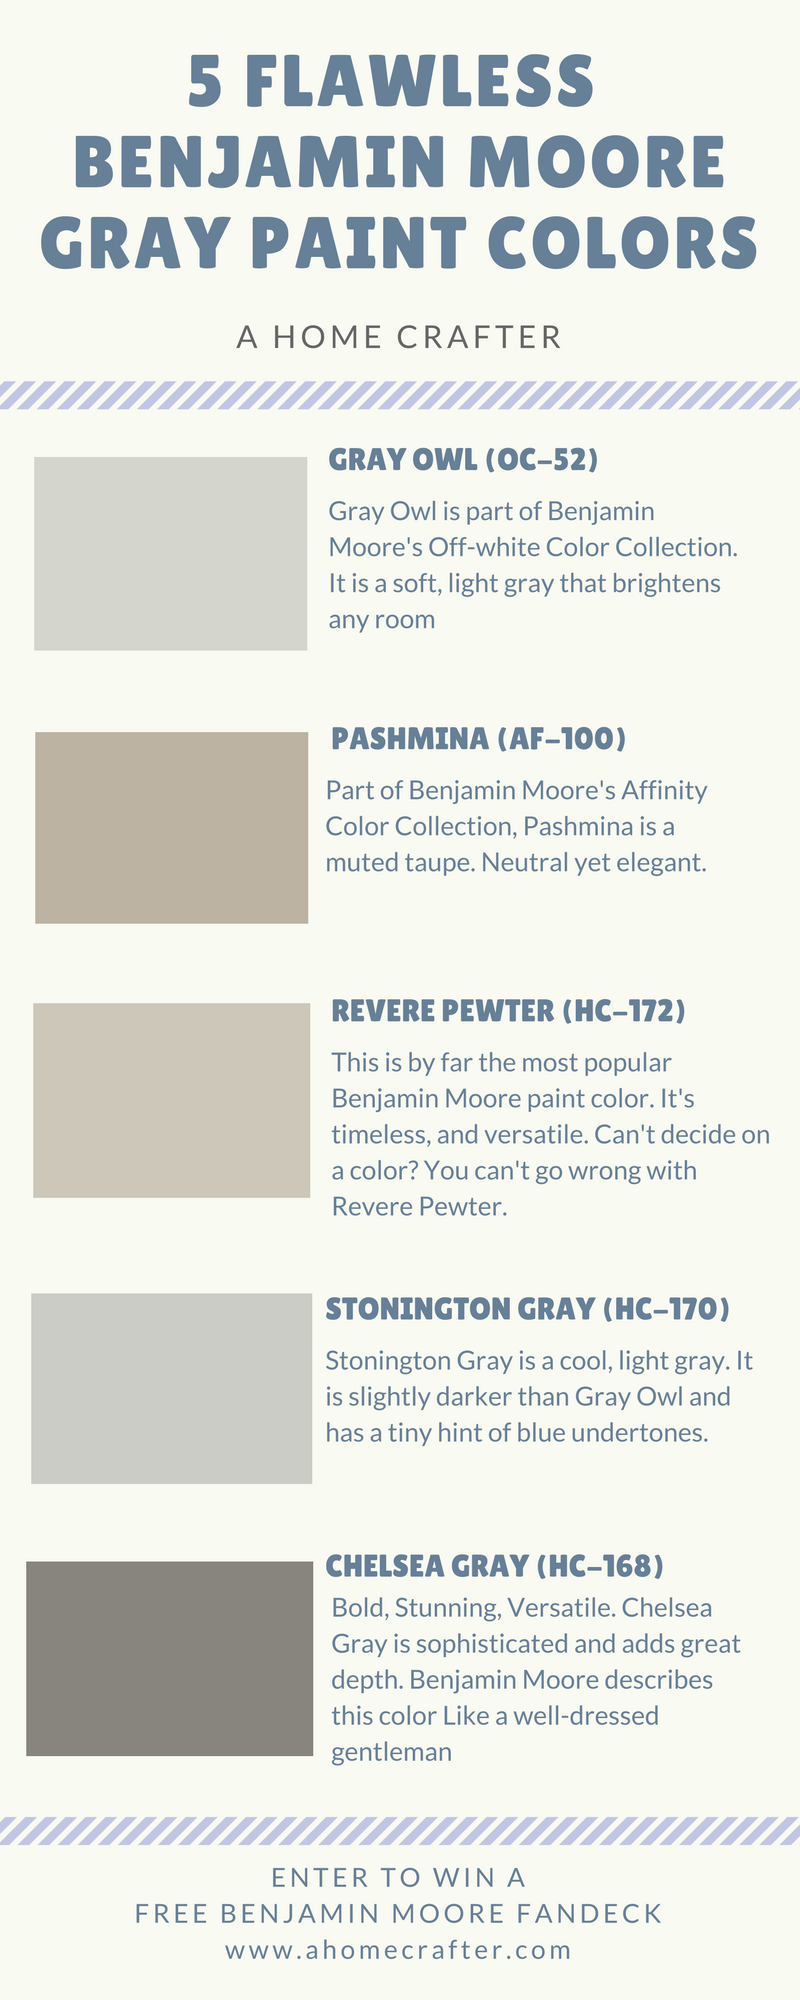 Click to see images of these colors in different rooms, and ENTER TO WIN a Benjamin Moore Fandeck!